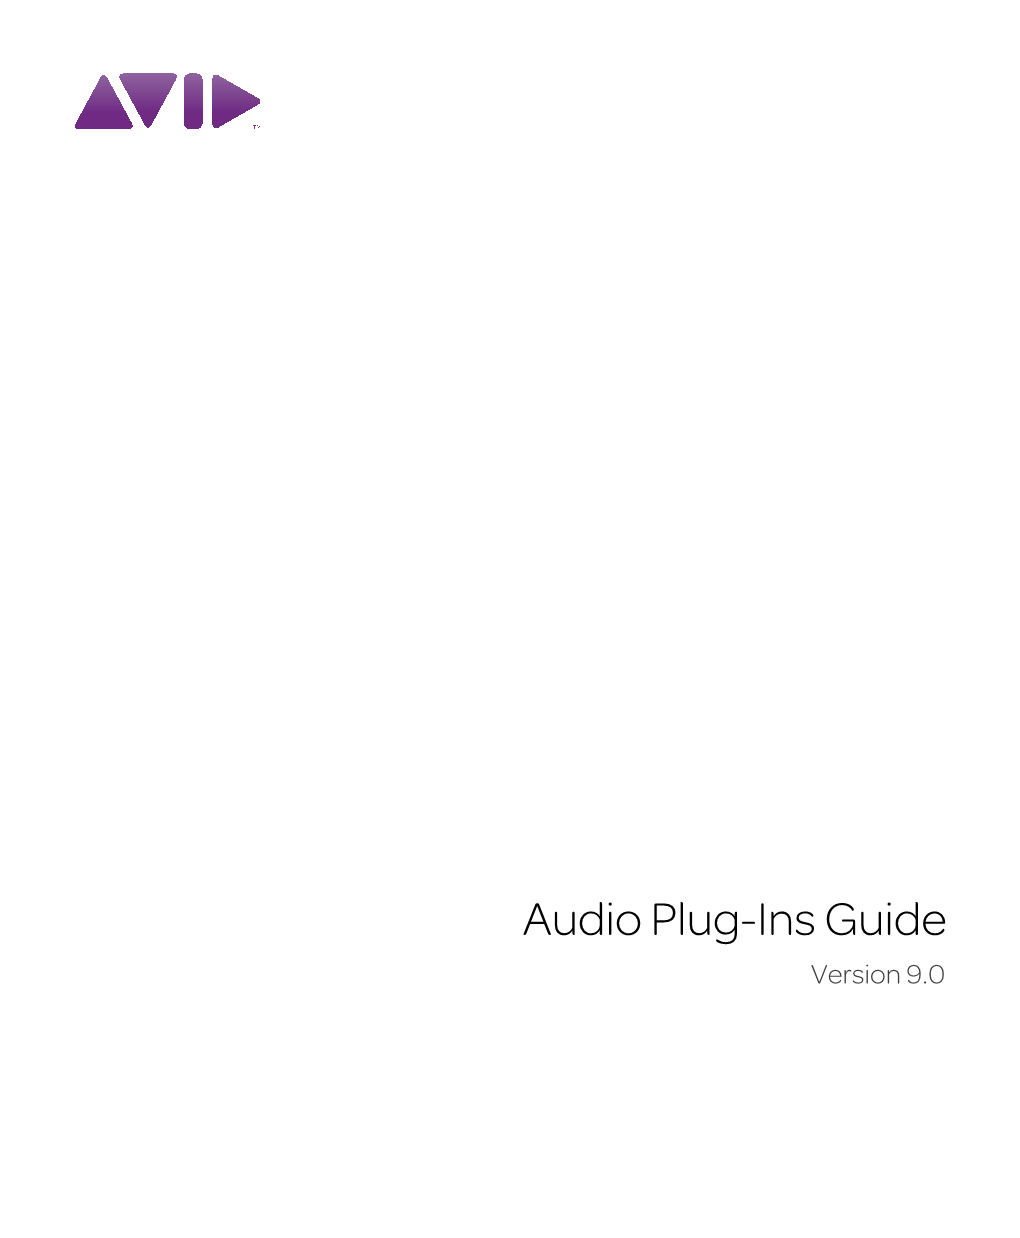 Audio Plug-Ins Guide Version 9.0 Legal Notices This Guide Is Copyrighted ©2010 by Avid Technology, Inc., (Hereafter “Avid”), with All Rights Reserved